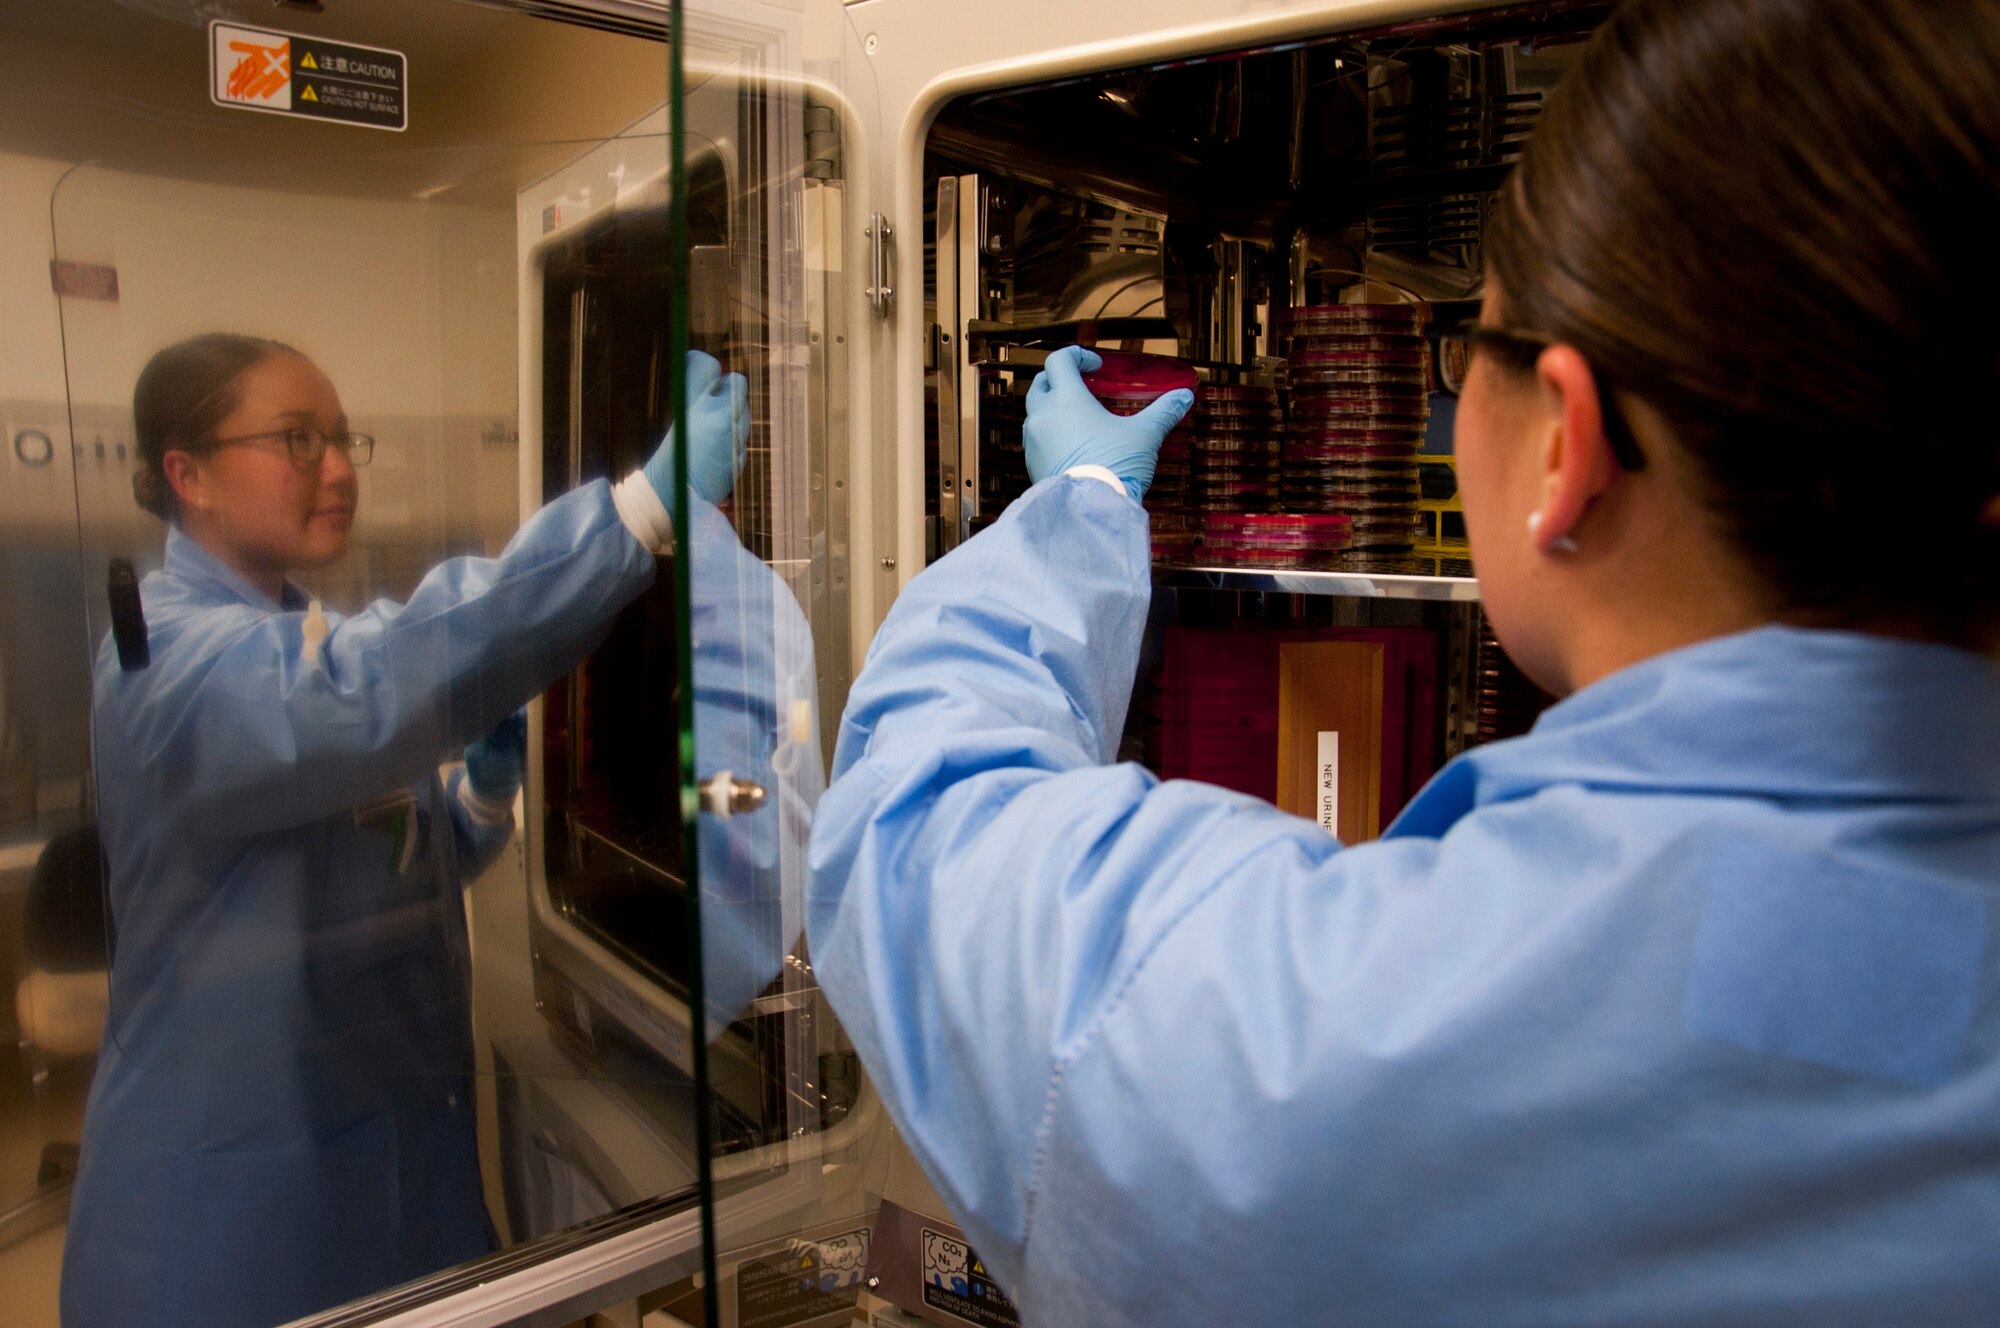 Senior Airman Mary Boyd, 6th Medical Support Squadron laboratory technician, puts a micro plate in an incubator May 6, 2015 at MacDill Air Force Base, Fla. The incubator is used to store micro plates to help the bacteria grow. (U.S. Air Force photo by Senior Airman Jenay Randolph/Released) 